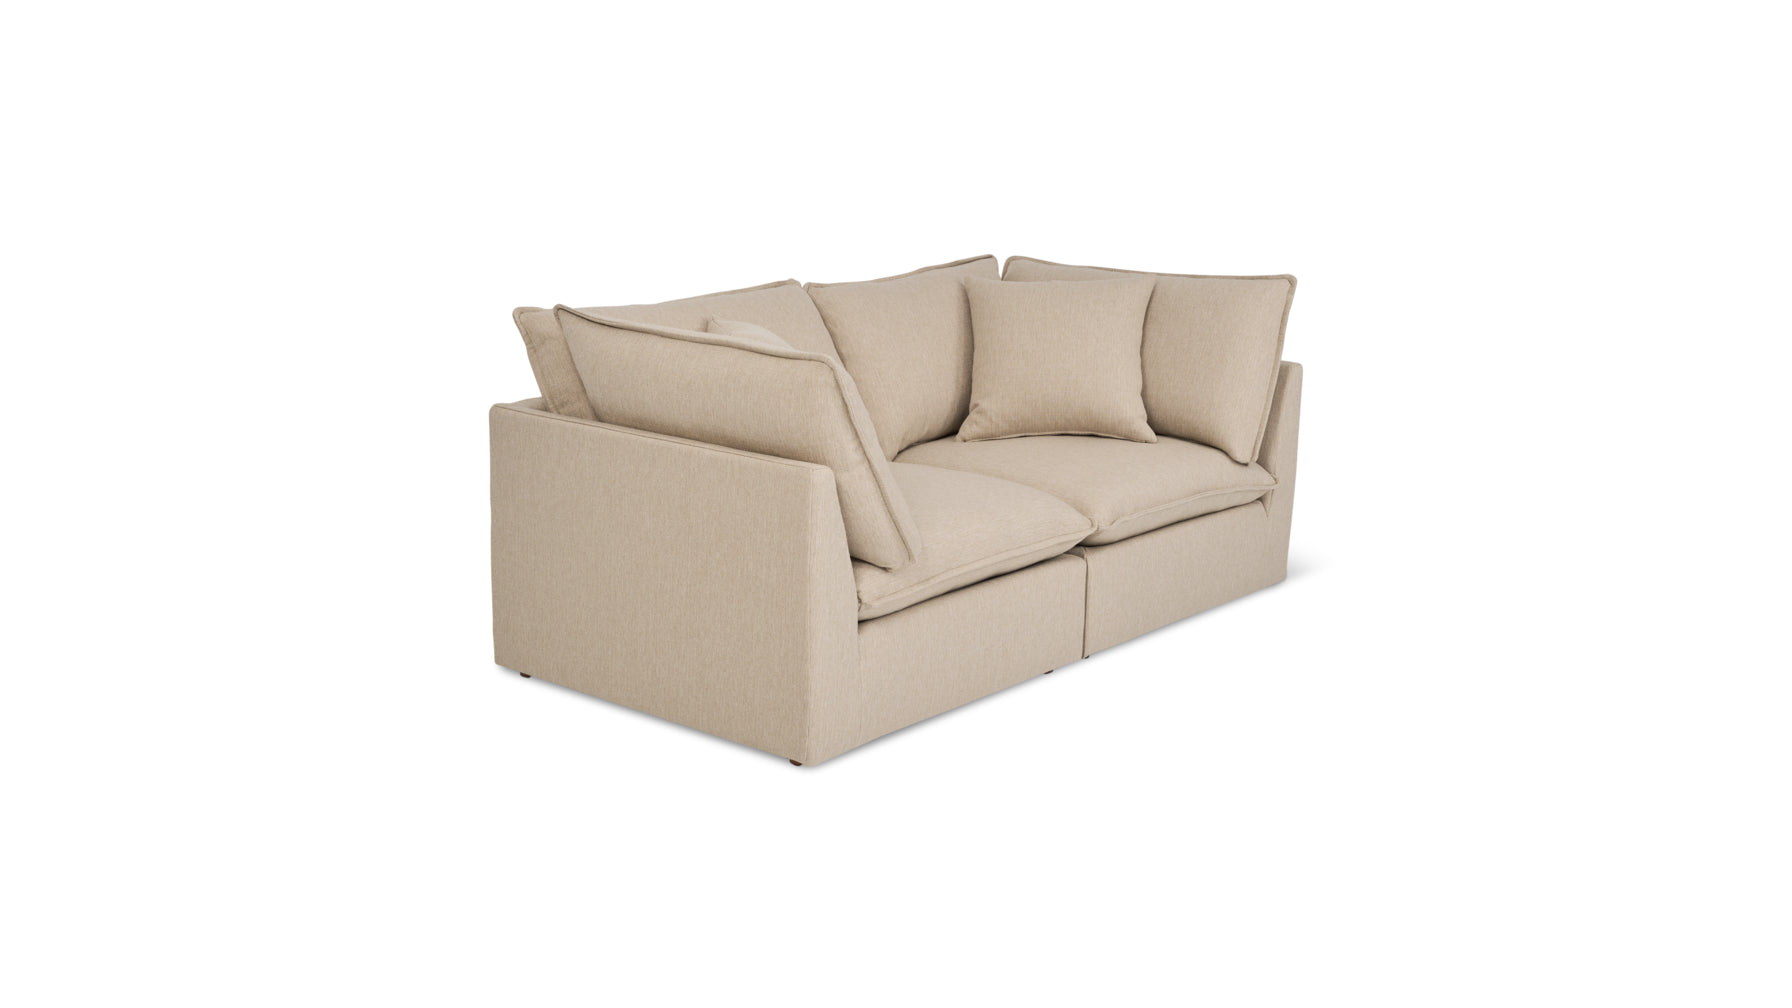 Chill Time 2-Piece Modular Sofa, Biscuit - Image 2